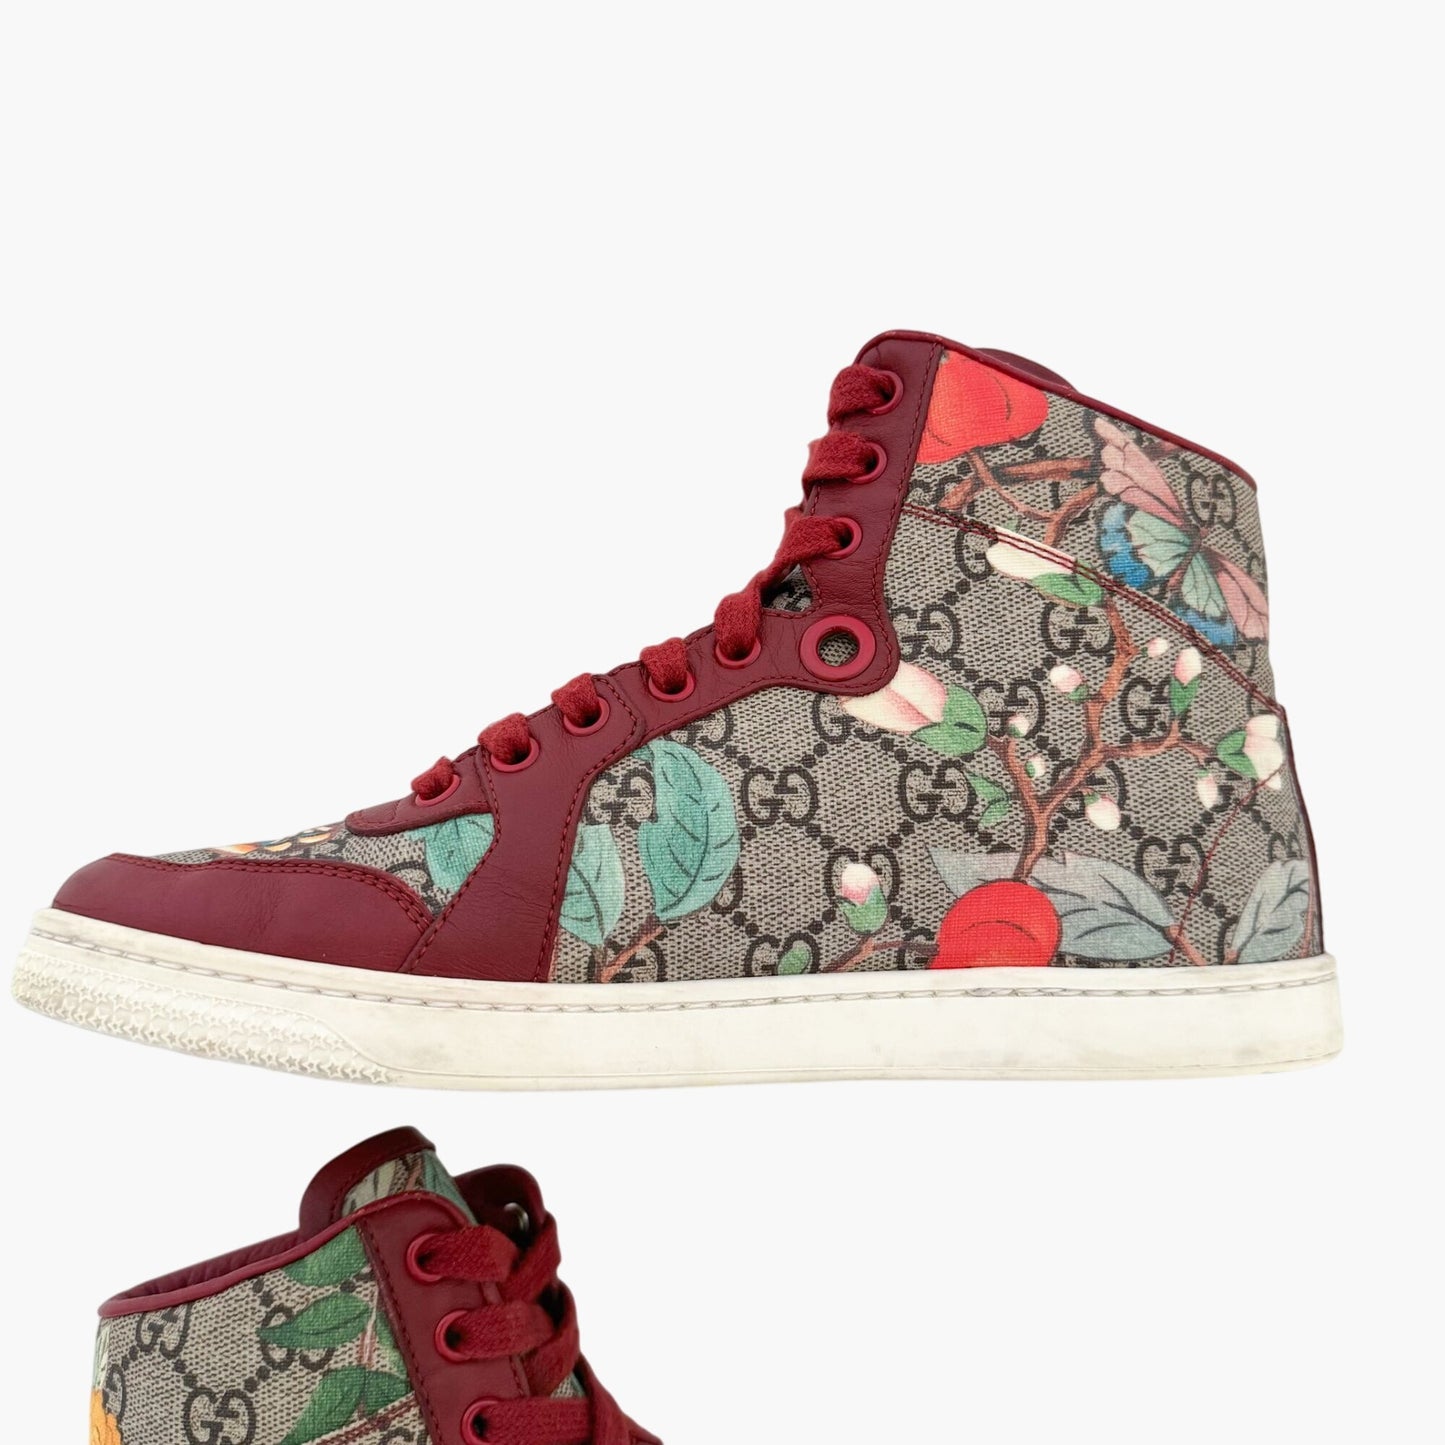 Gucci Tian High Top Sneakers in Supreme Monogram & Red Leather Size 37